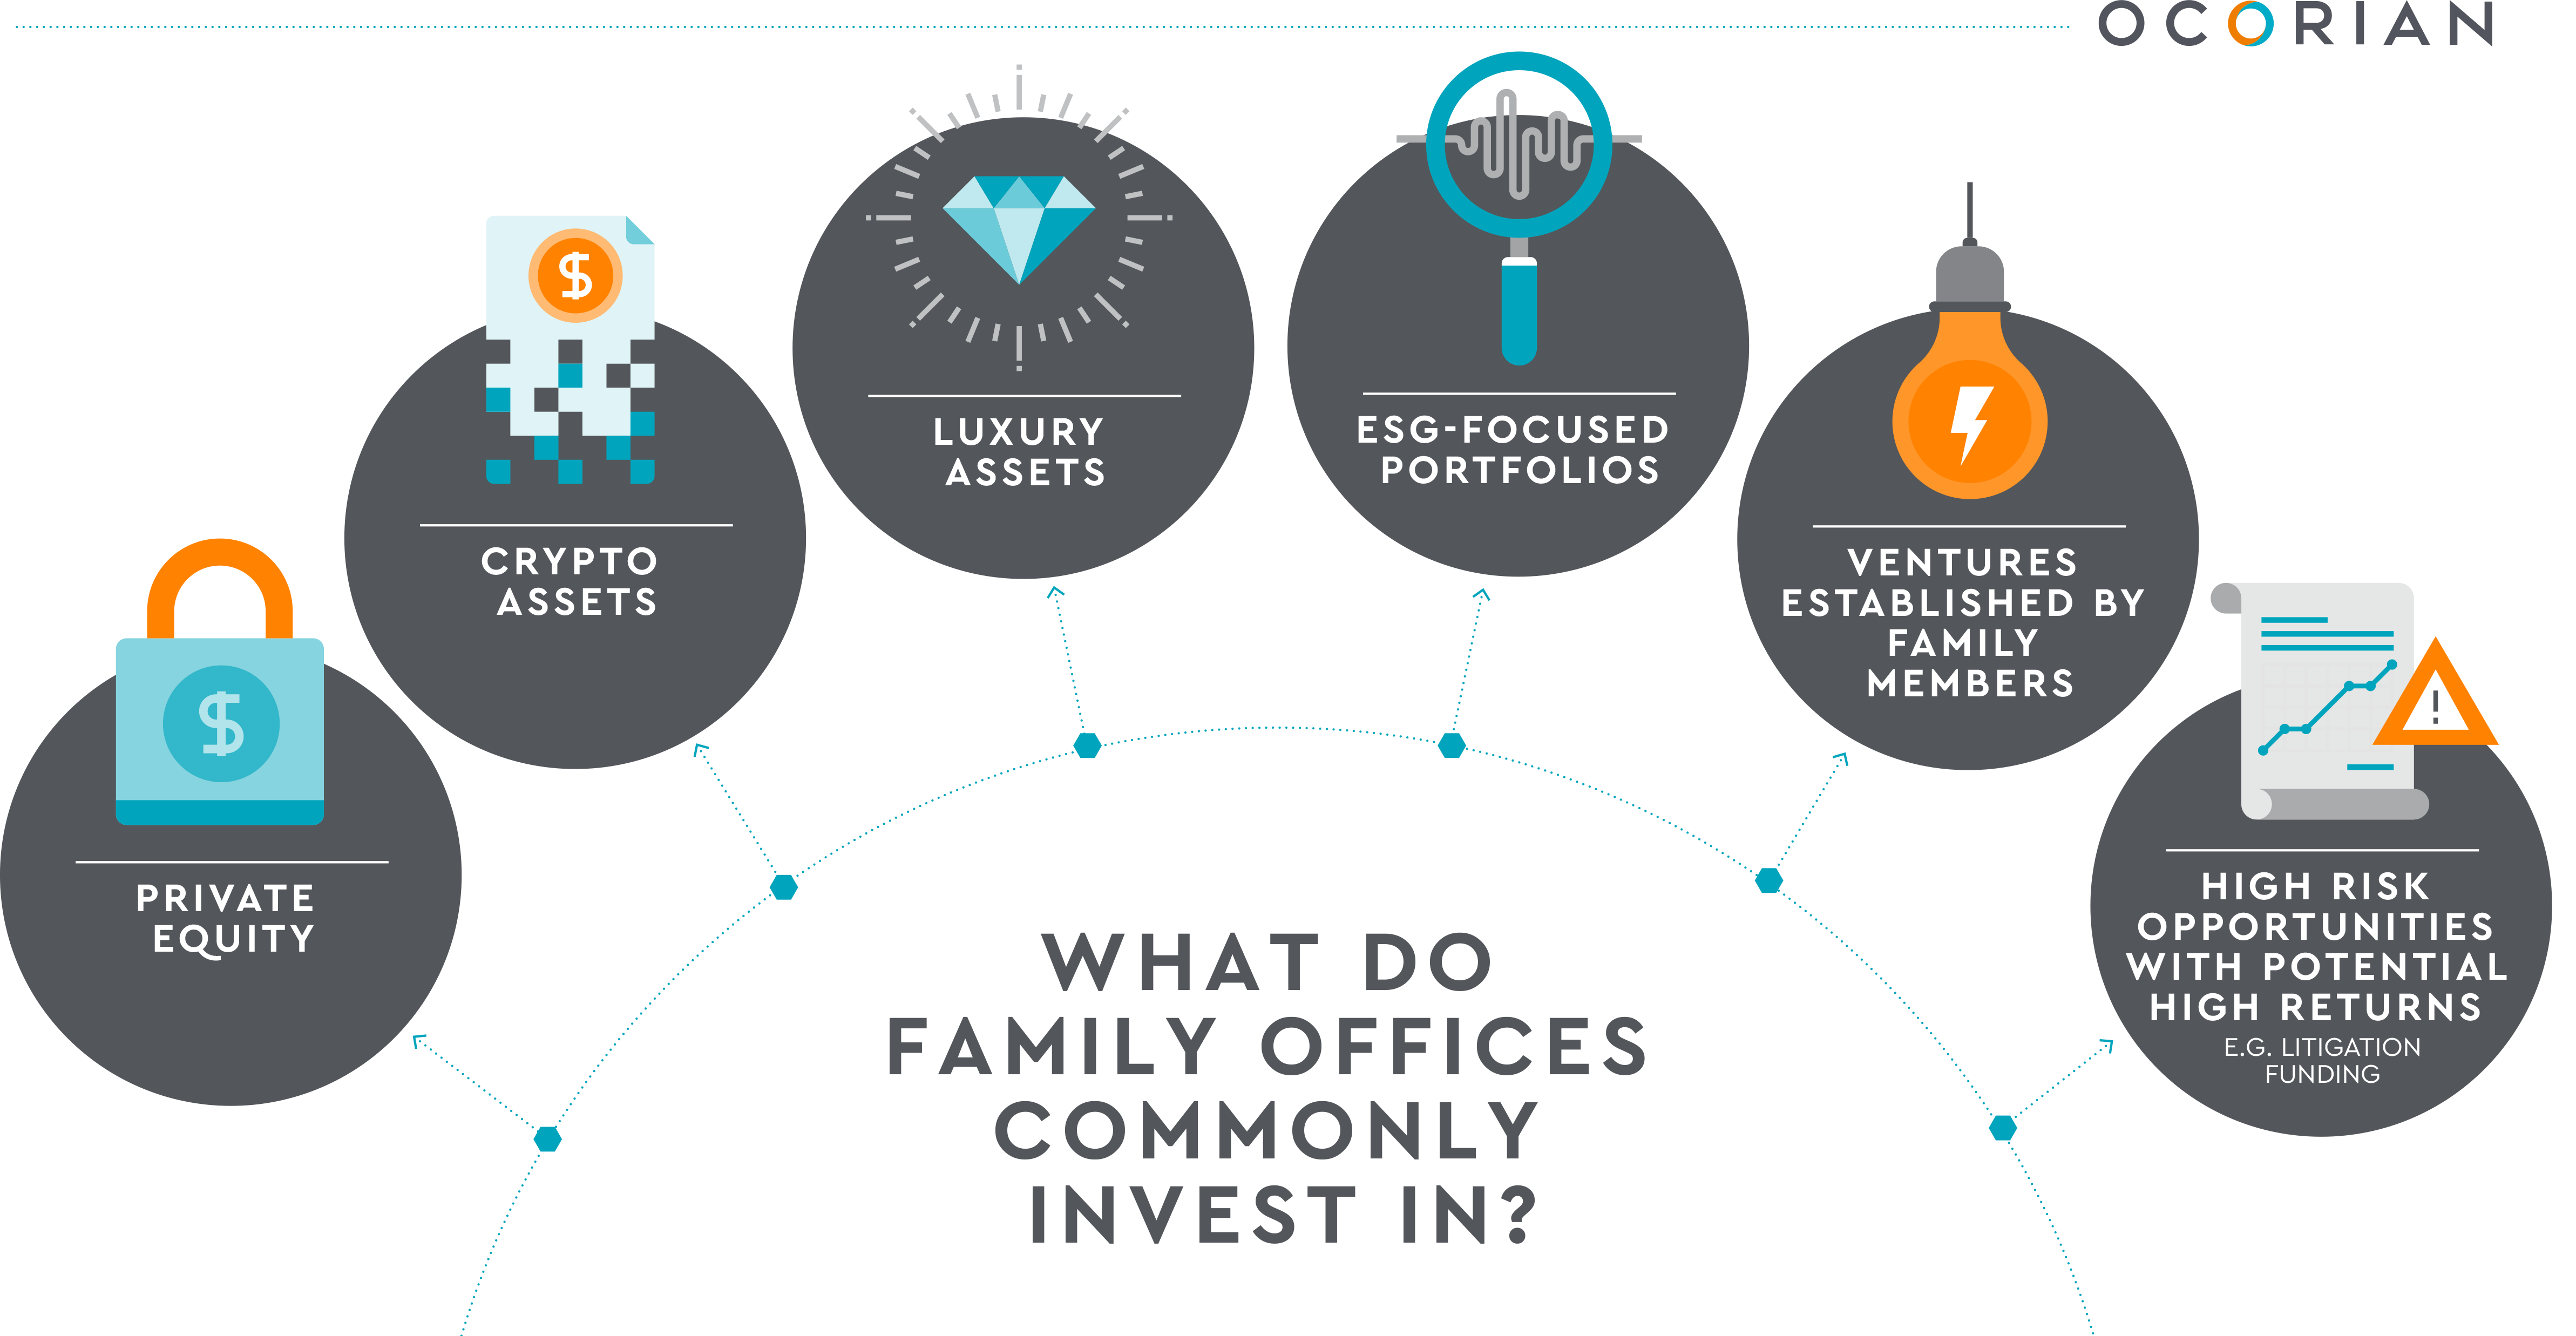 What are family offices investing in?